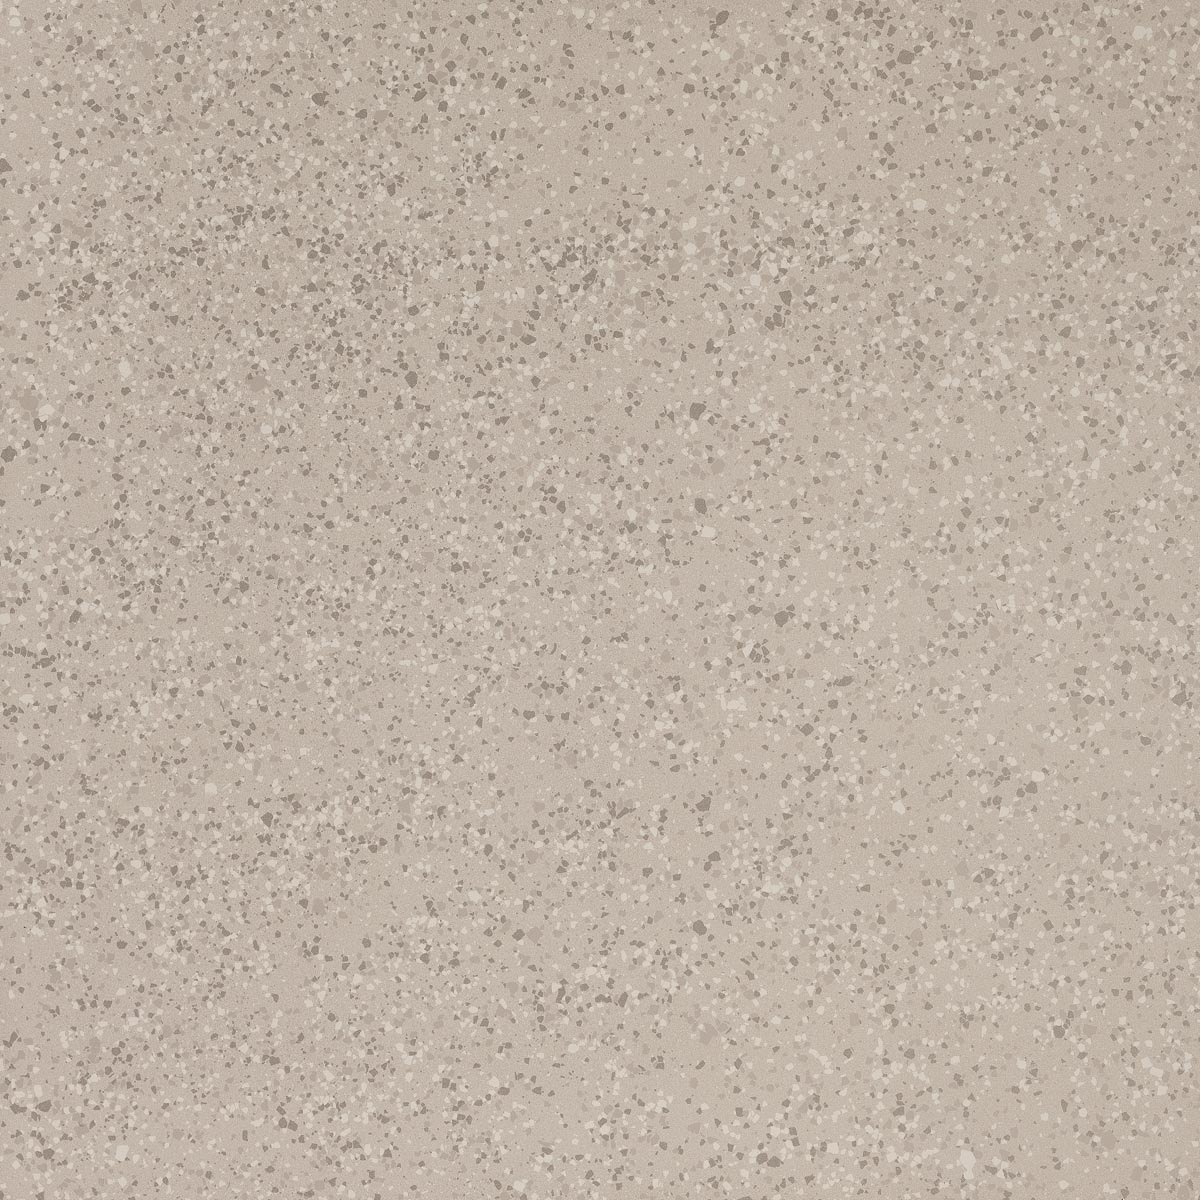 Imola Parade Argento Natural Flat Matt Outdoor 166101 120x120cm rectified 10,5mm - PRDE RB120AG RM